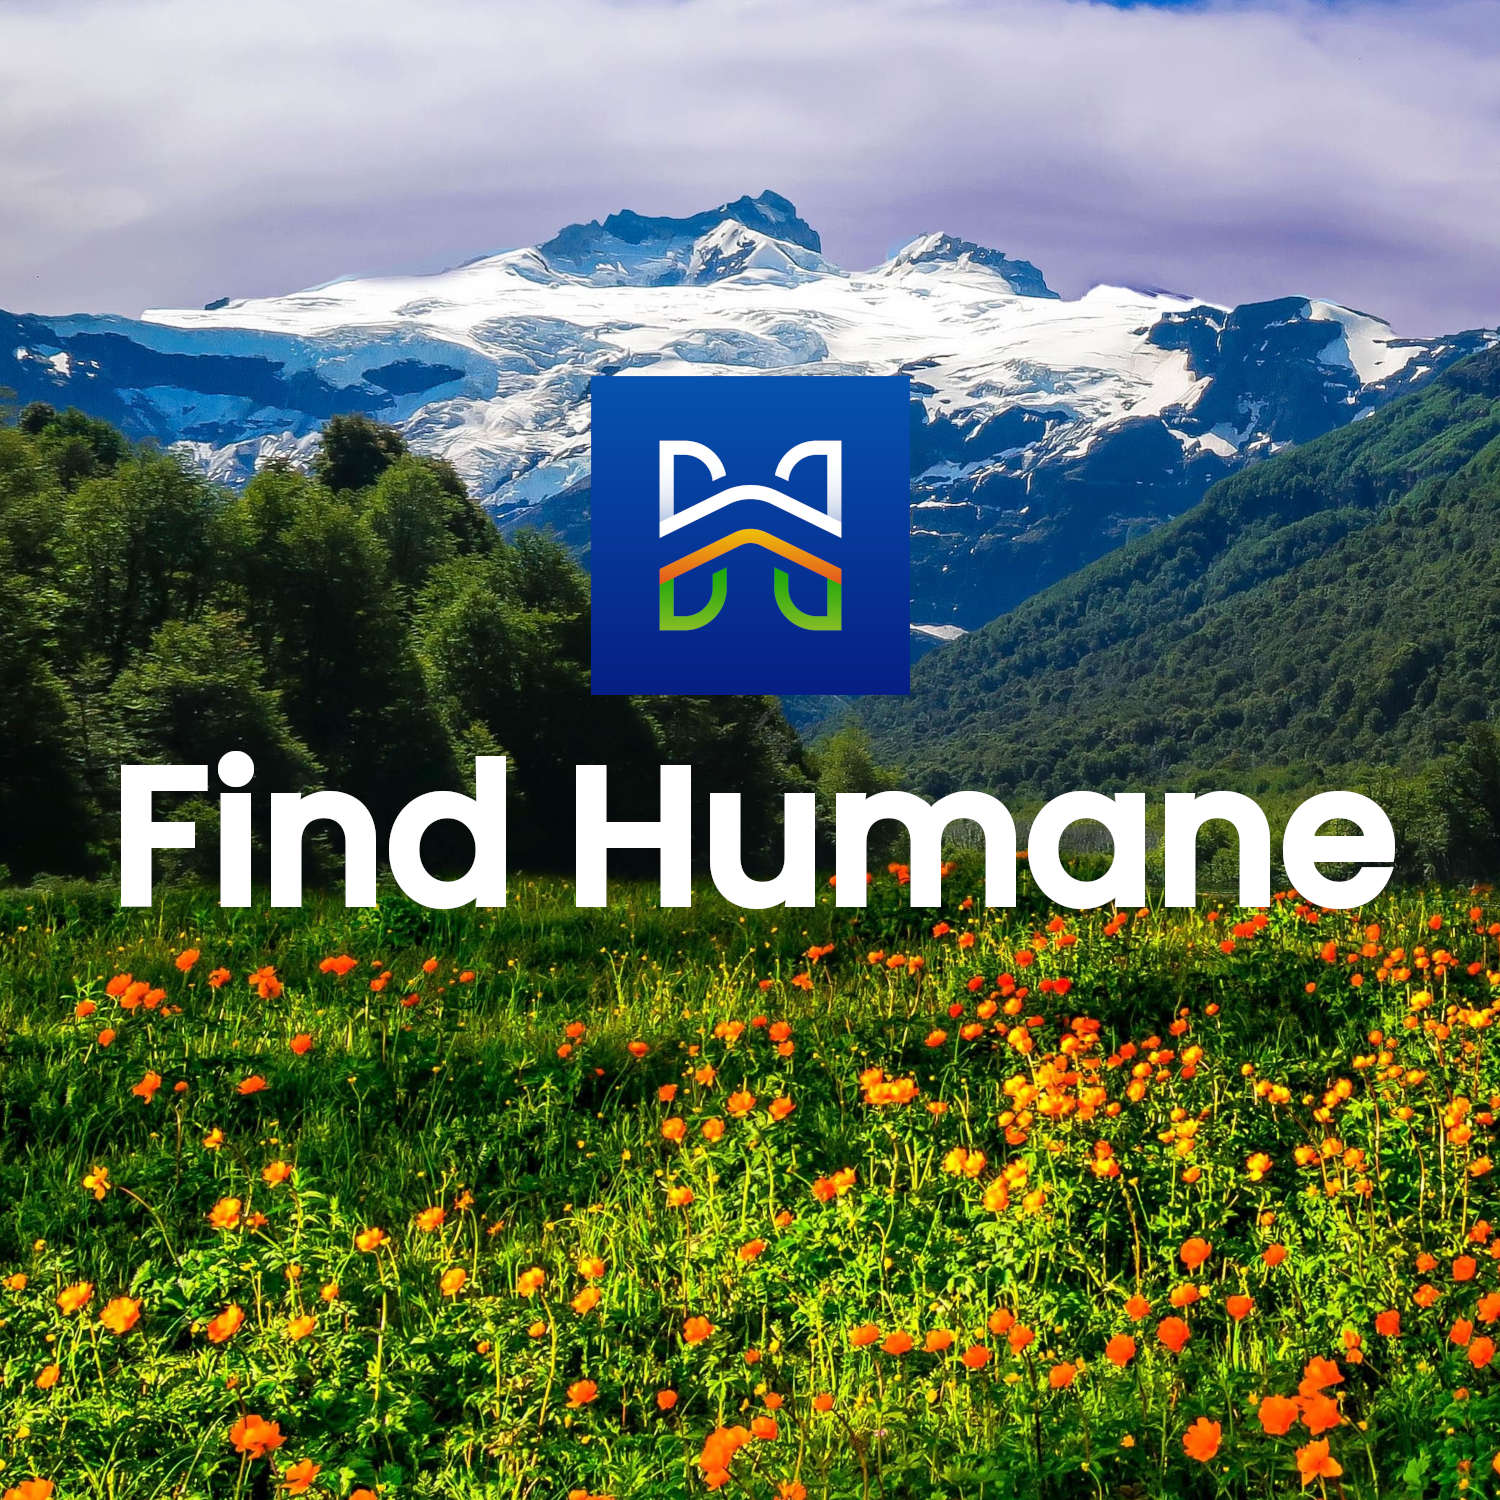 Show HN: Find humanely raised animal-based products